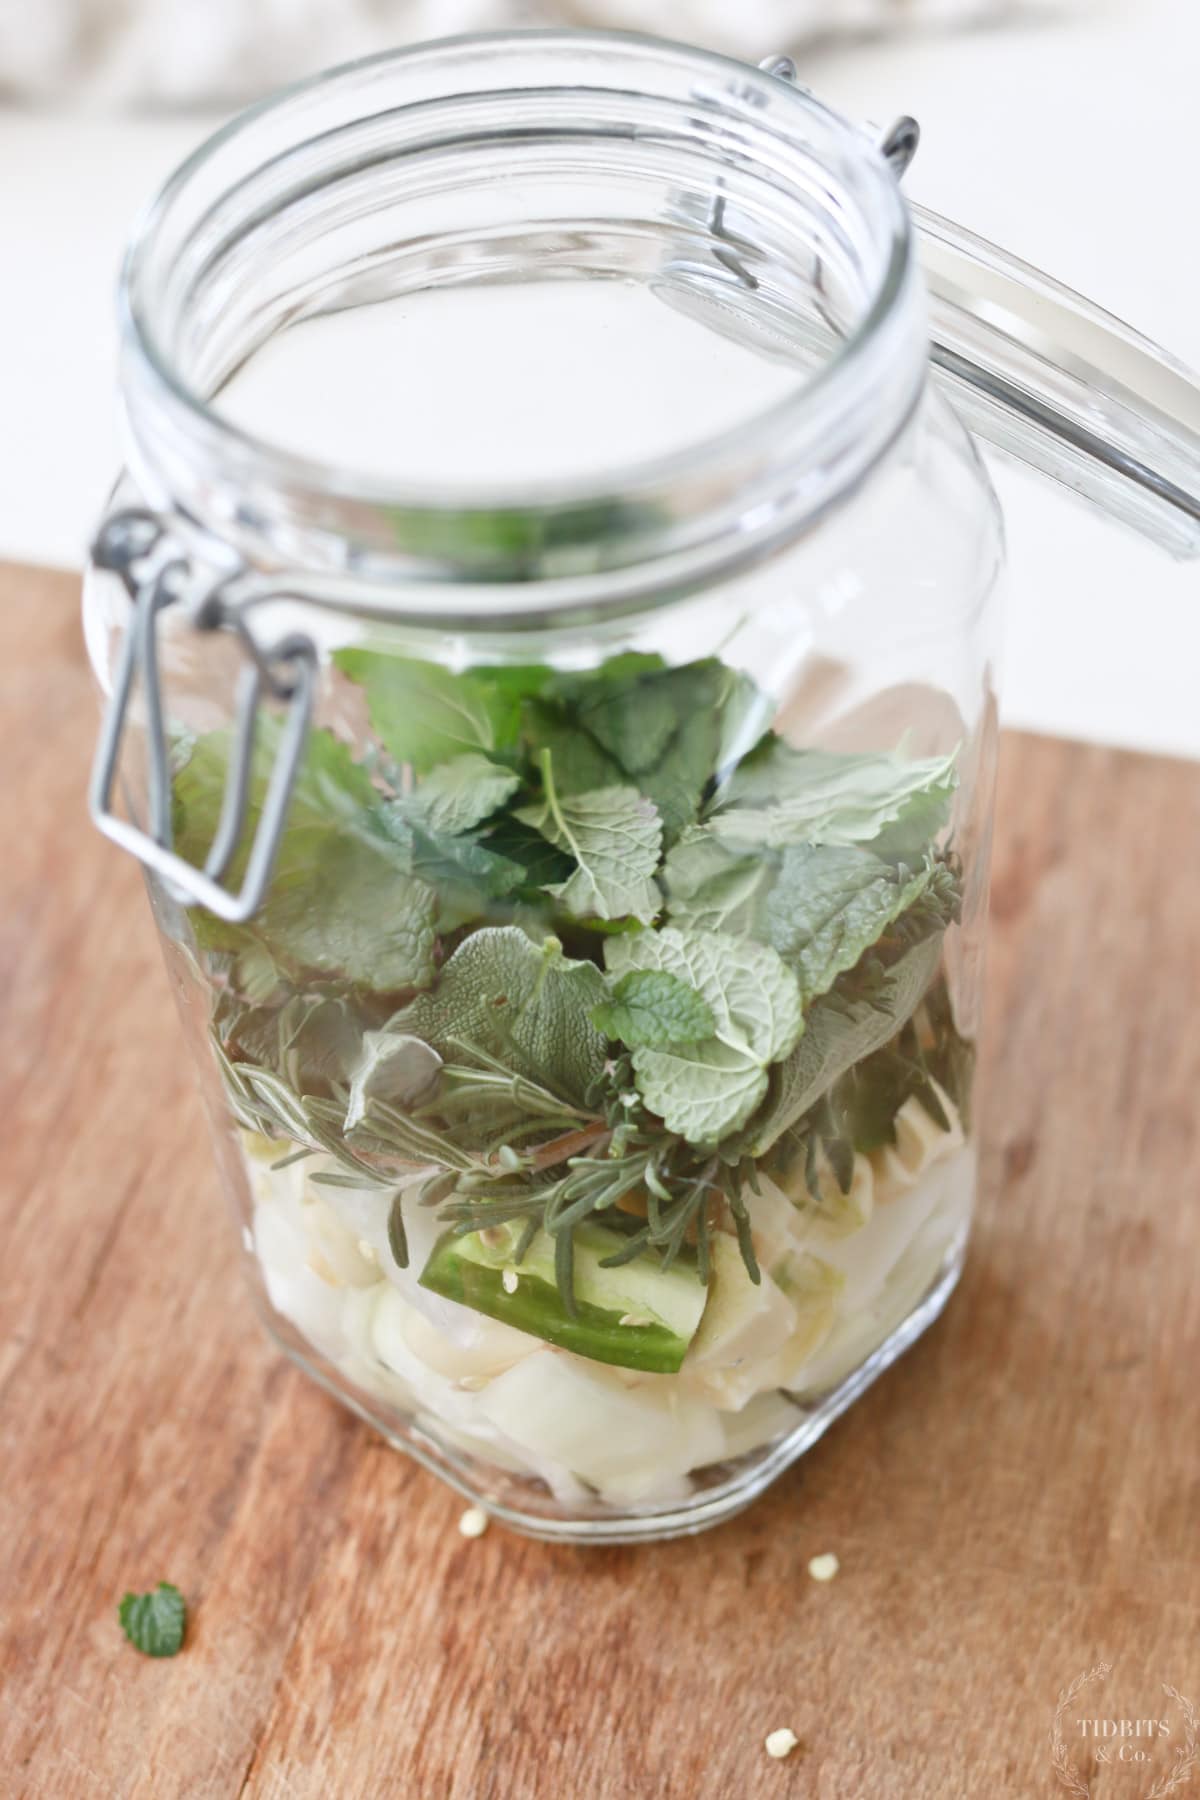 A glass jar holds layers of vegetables and herbs